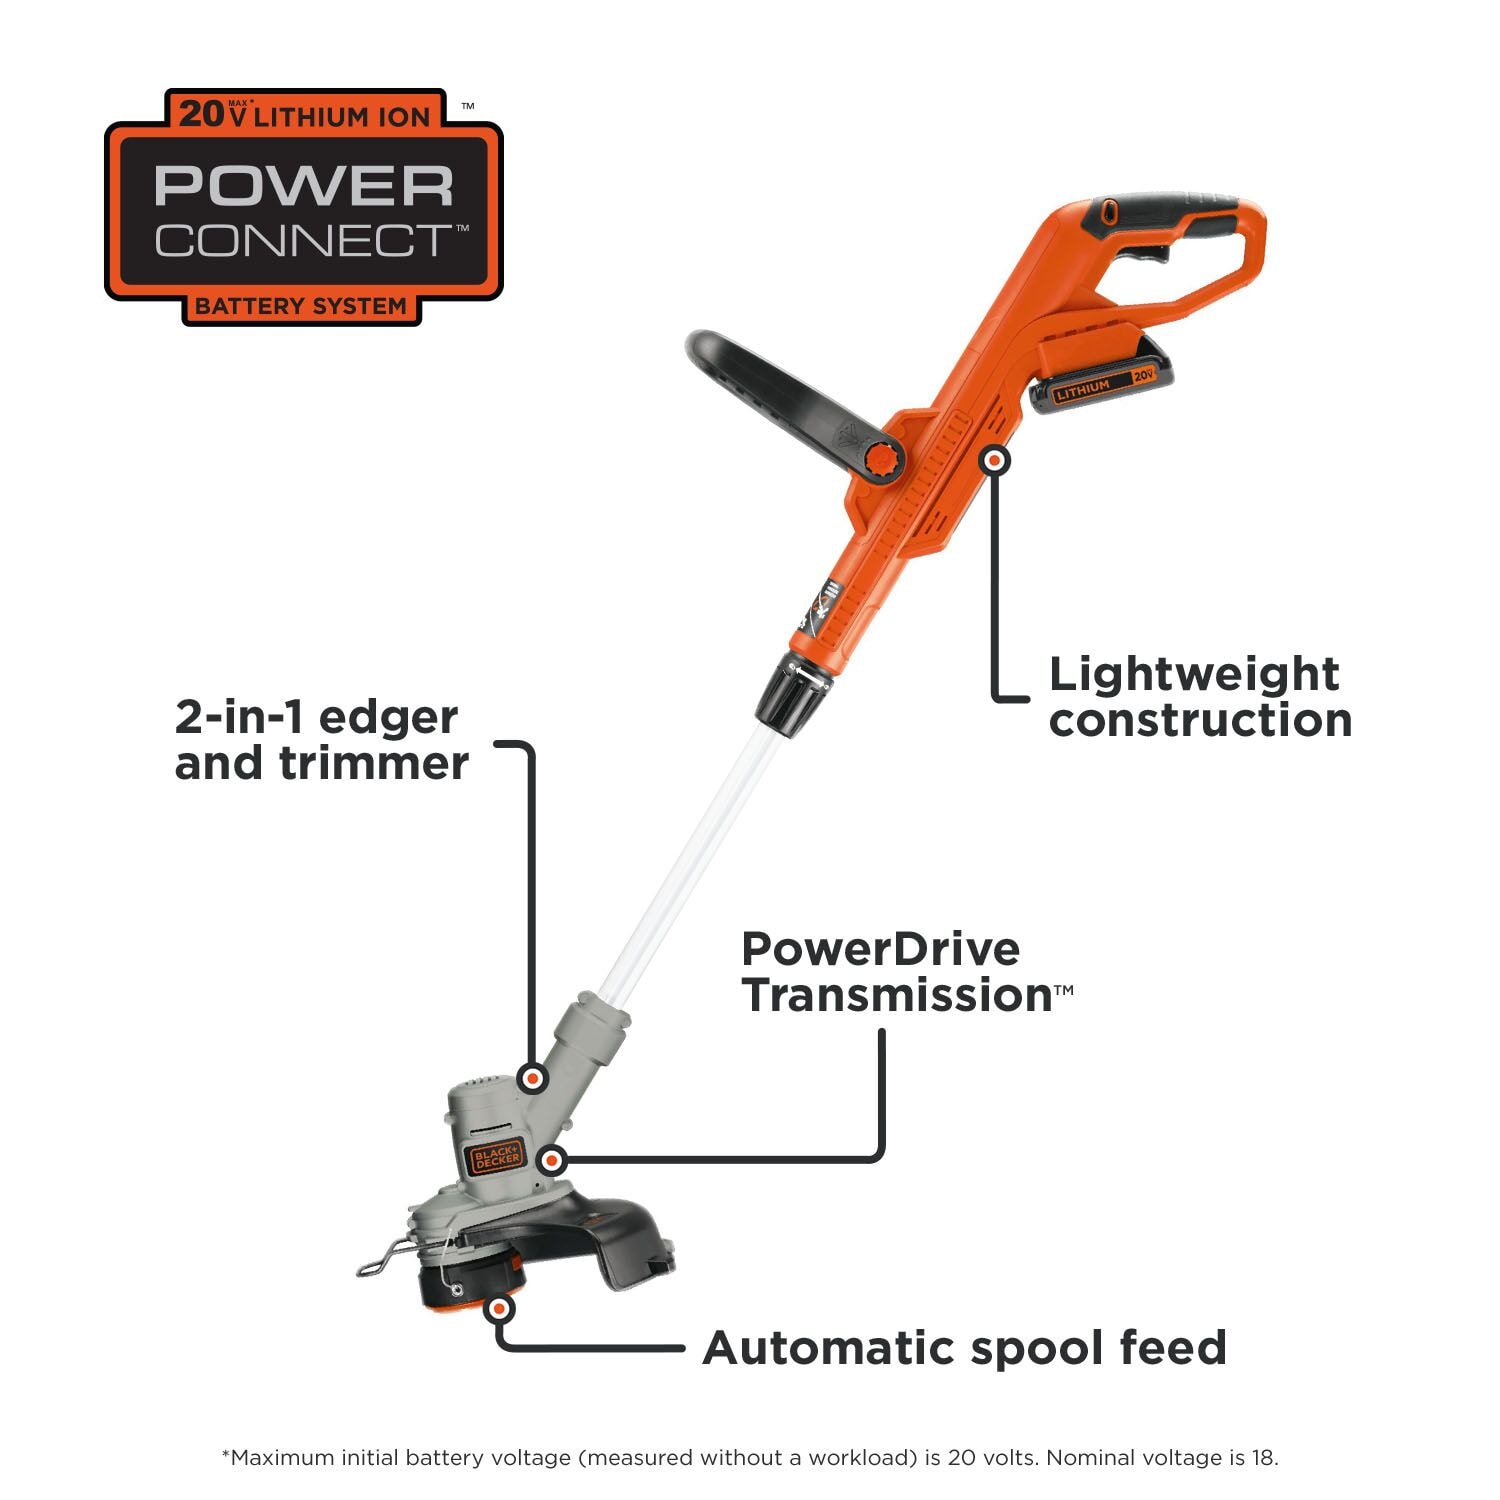 BLACK & DECKER 20V Cordless Combo Kit, String/Hedge Trimmer and Sweeper, 2  Batteries and Charger Included (BCK3789D2),Orange